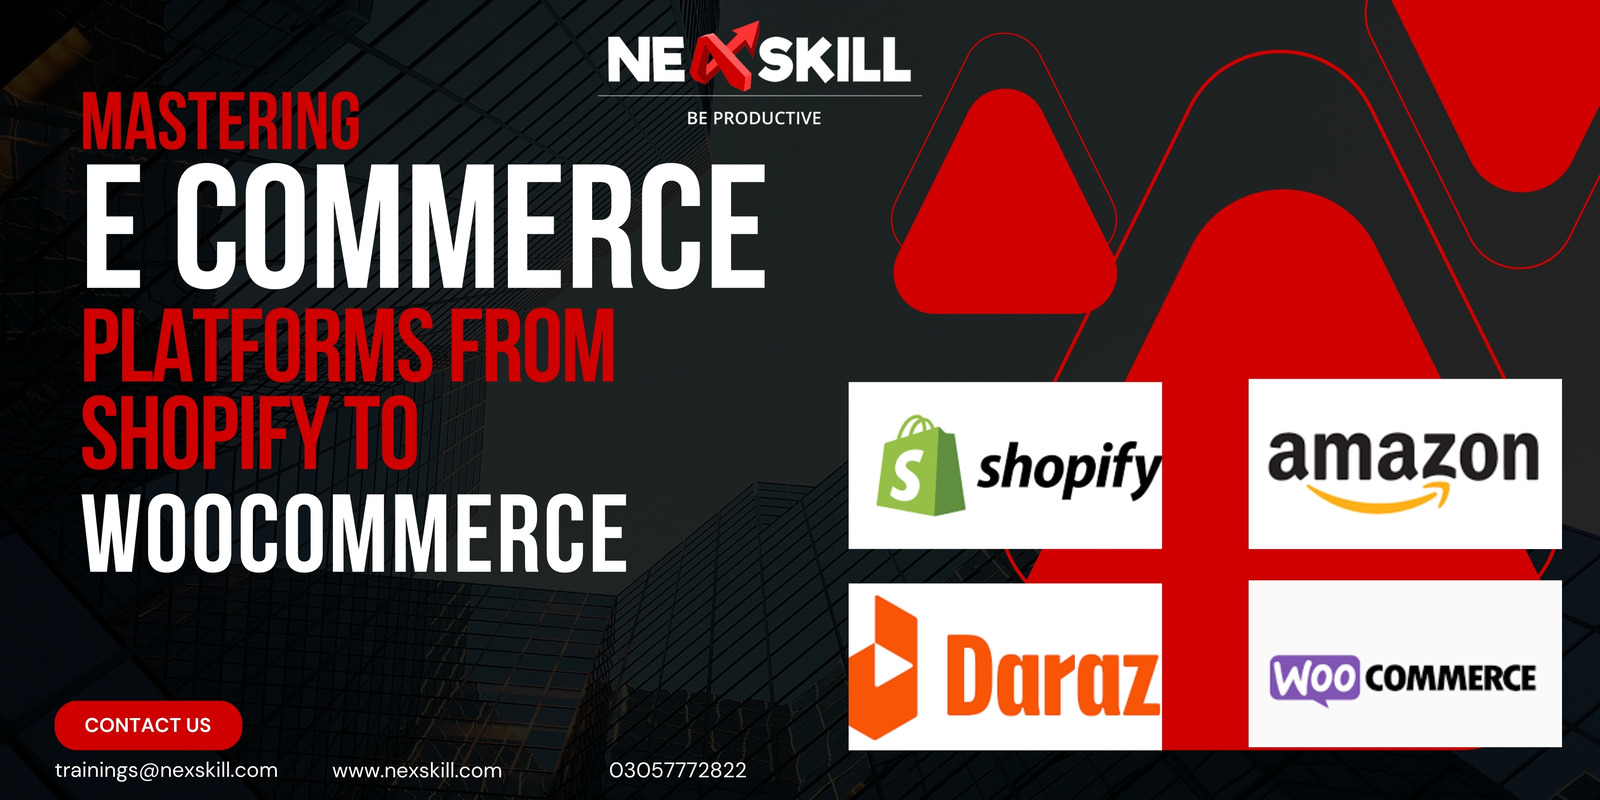 Mastering Ecommerce Platforms: From Shopify to WooCommerce